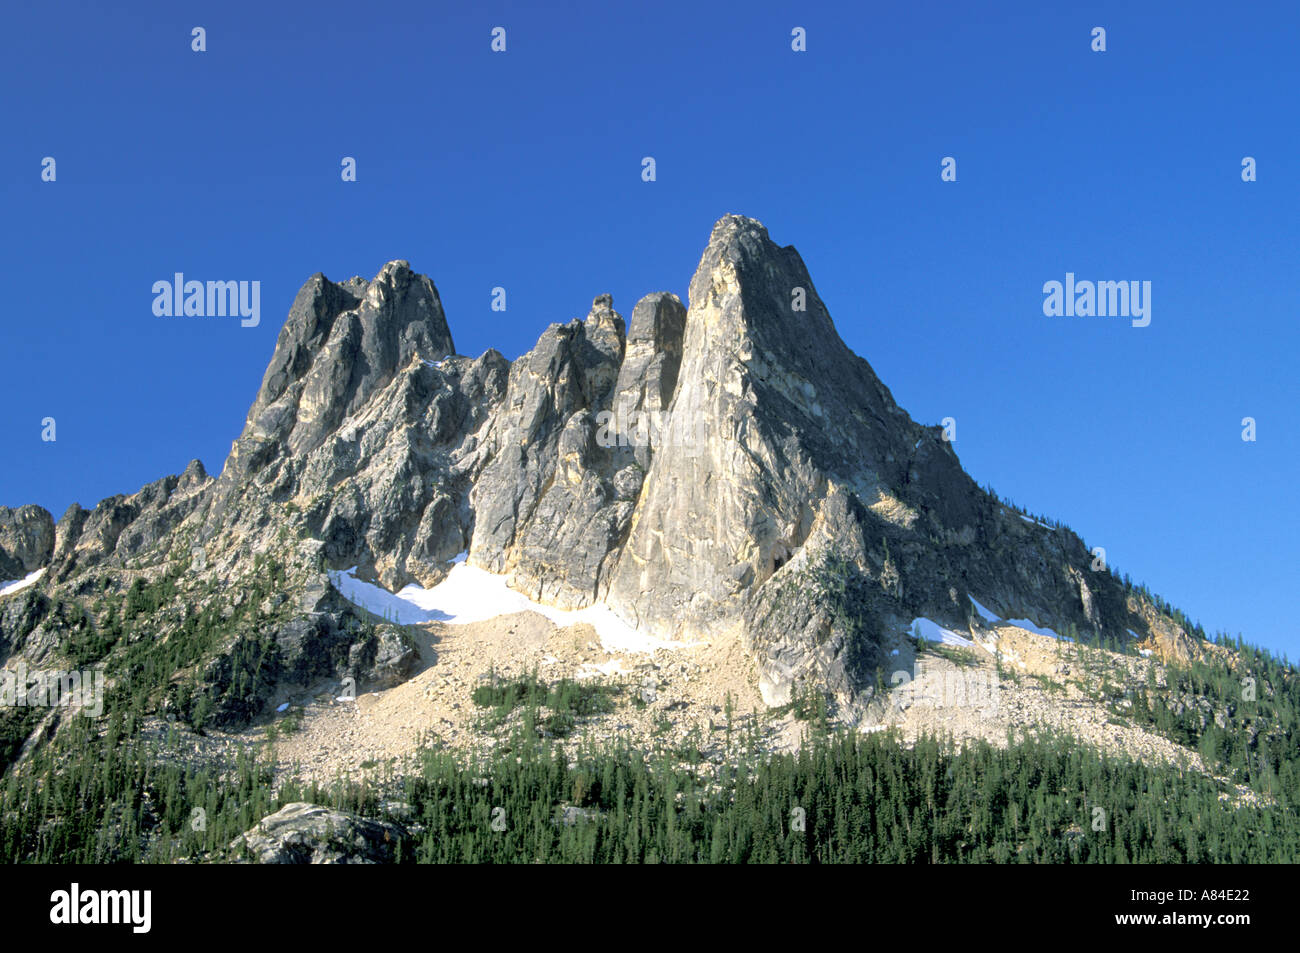 Liberty Bell Mountain Washington Pass Overlook Hwy 20 Mount Baker Snoqualmie National Forest North Cascades Washington Stock Photo